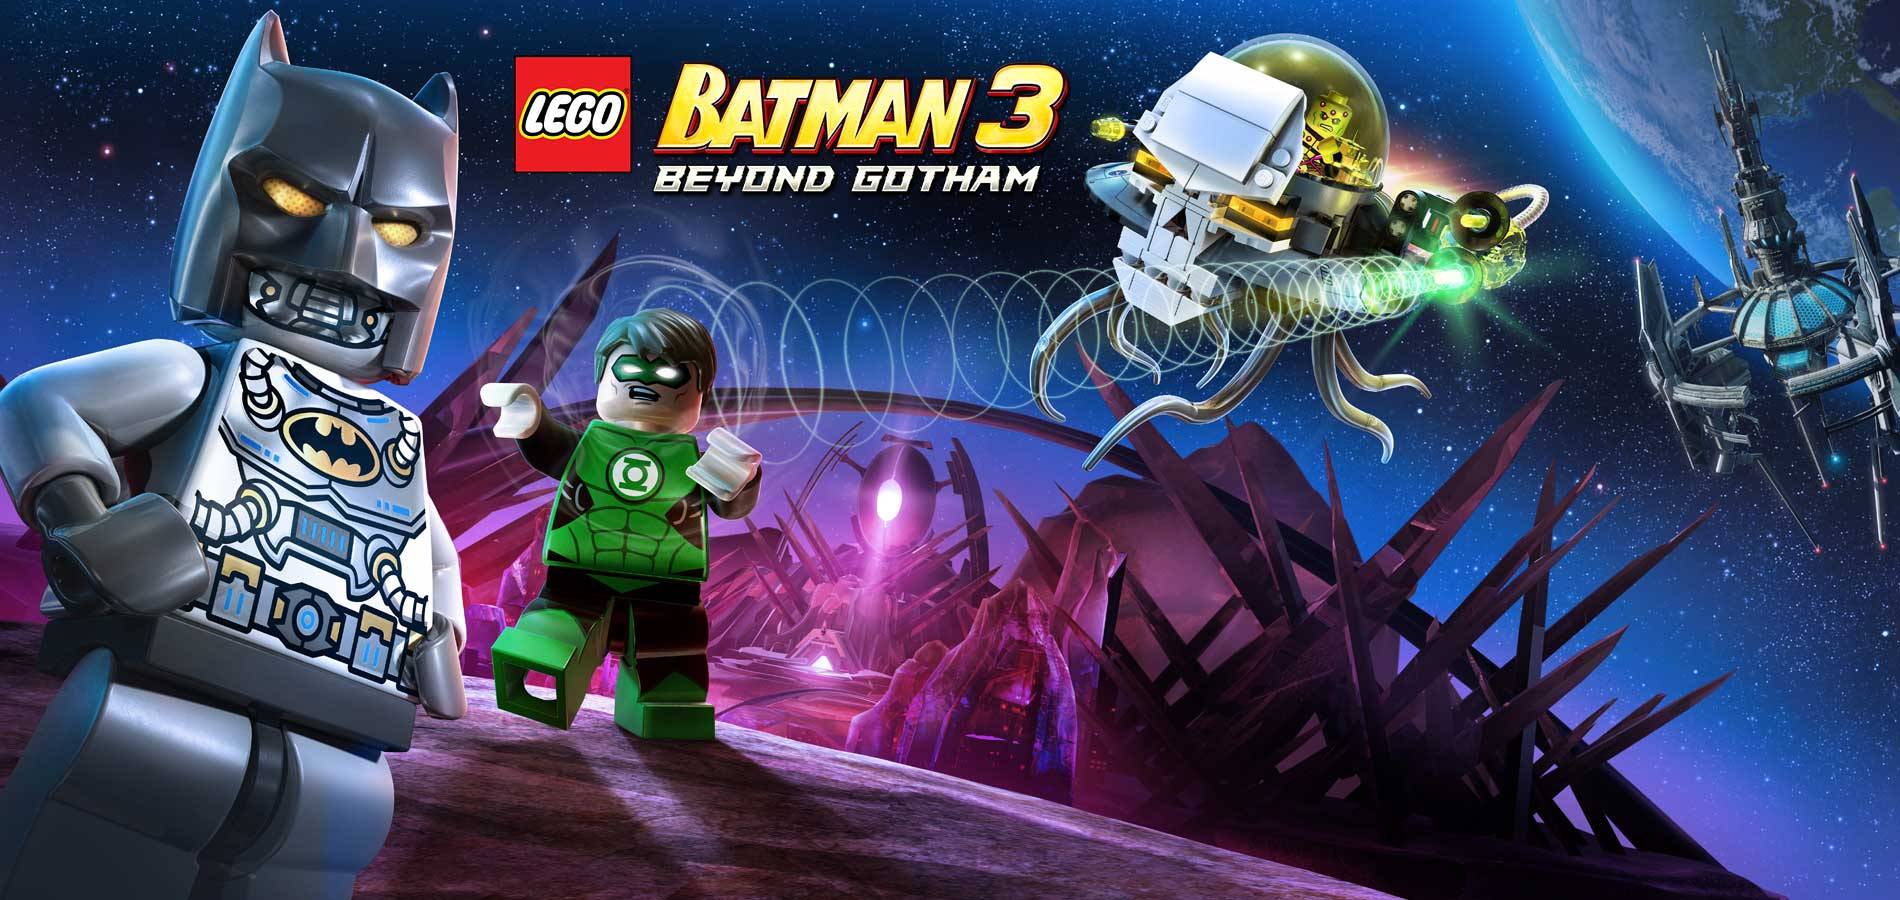 Two new Developer Diaries released for LEGO Batman 3: Beyond